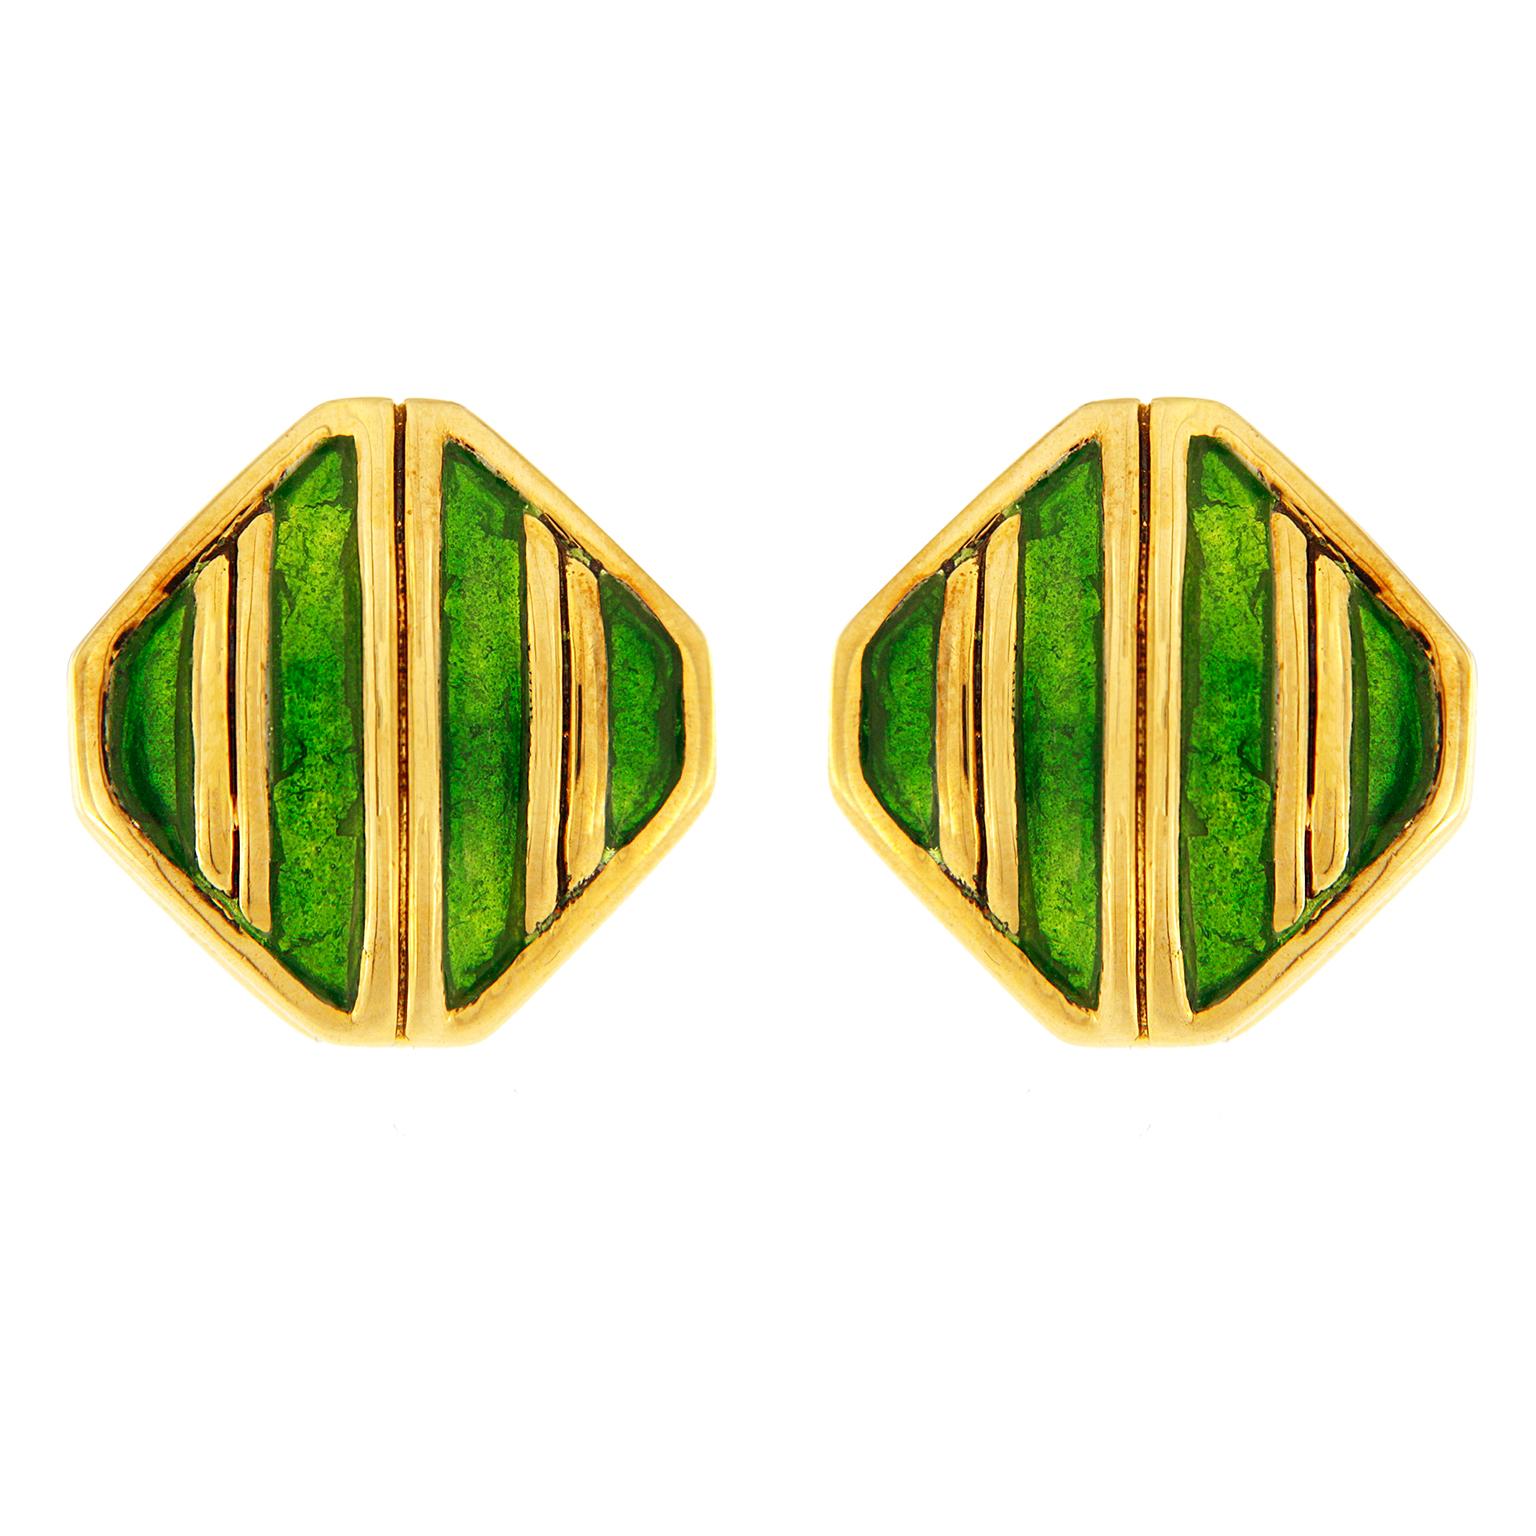 Valentin Magro Light Green Striped Enameled Gold Cufflinks Green display bright hues. The fronts are square shaped with beveled corners. Gold double stripes run diagonally across the front, with light green enamel in between. Bars and toggles make